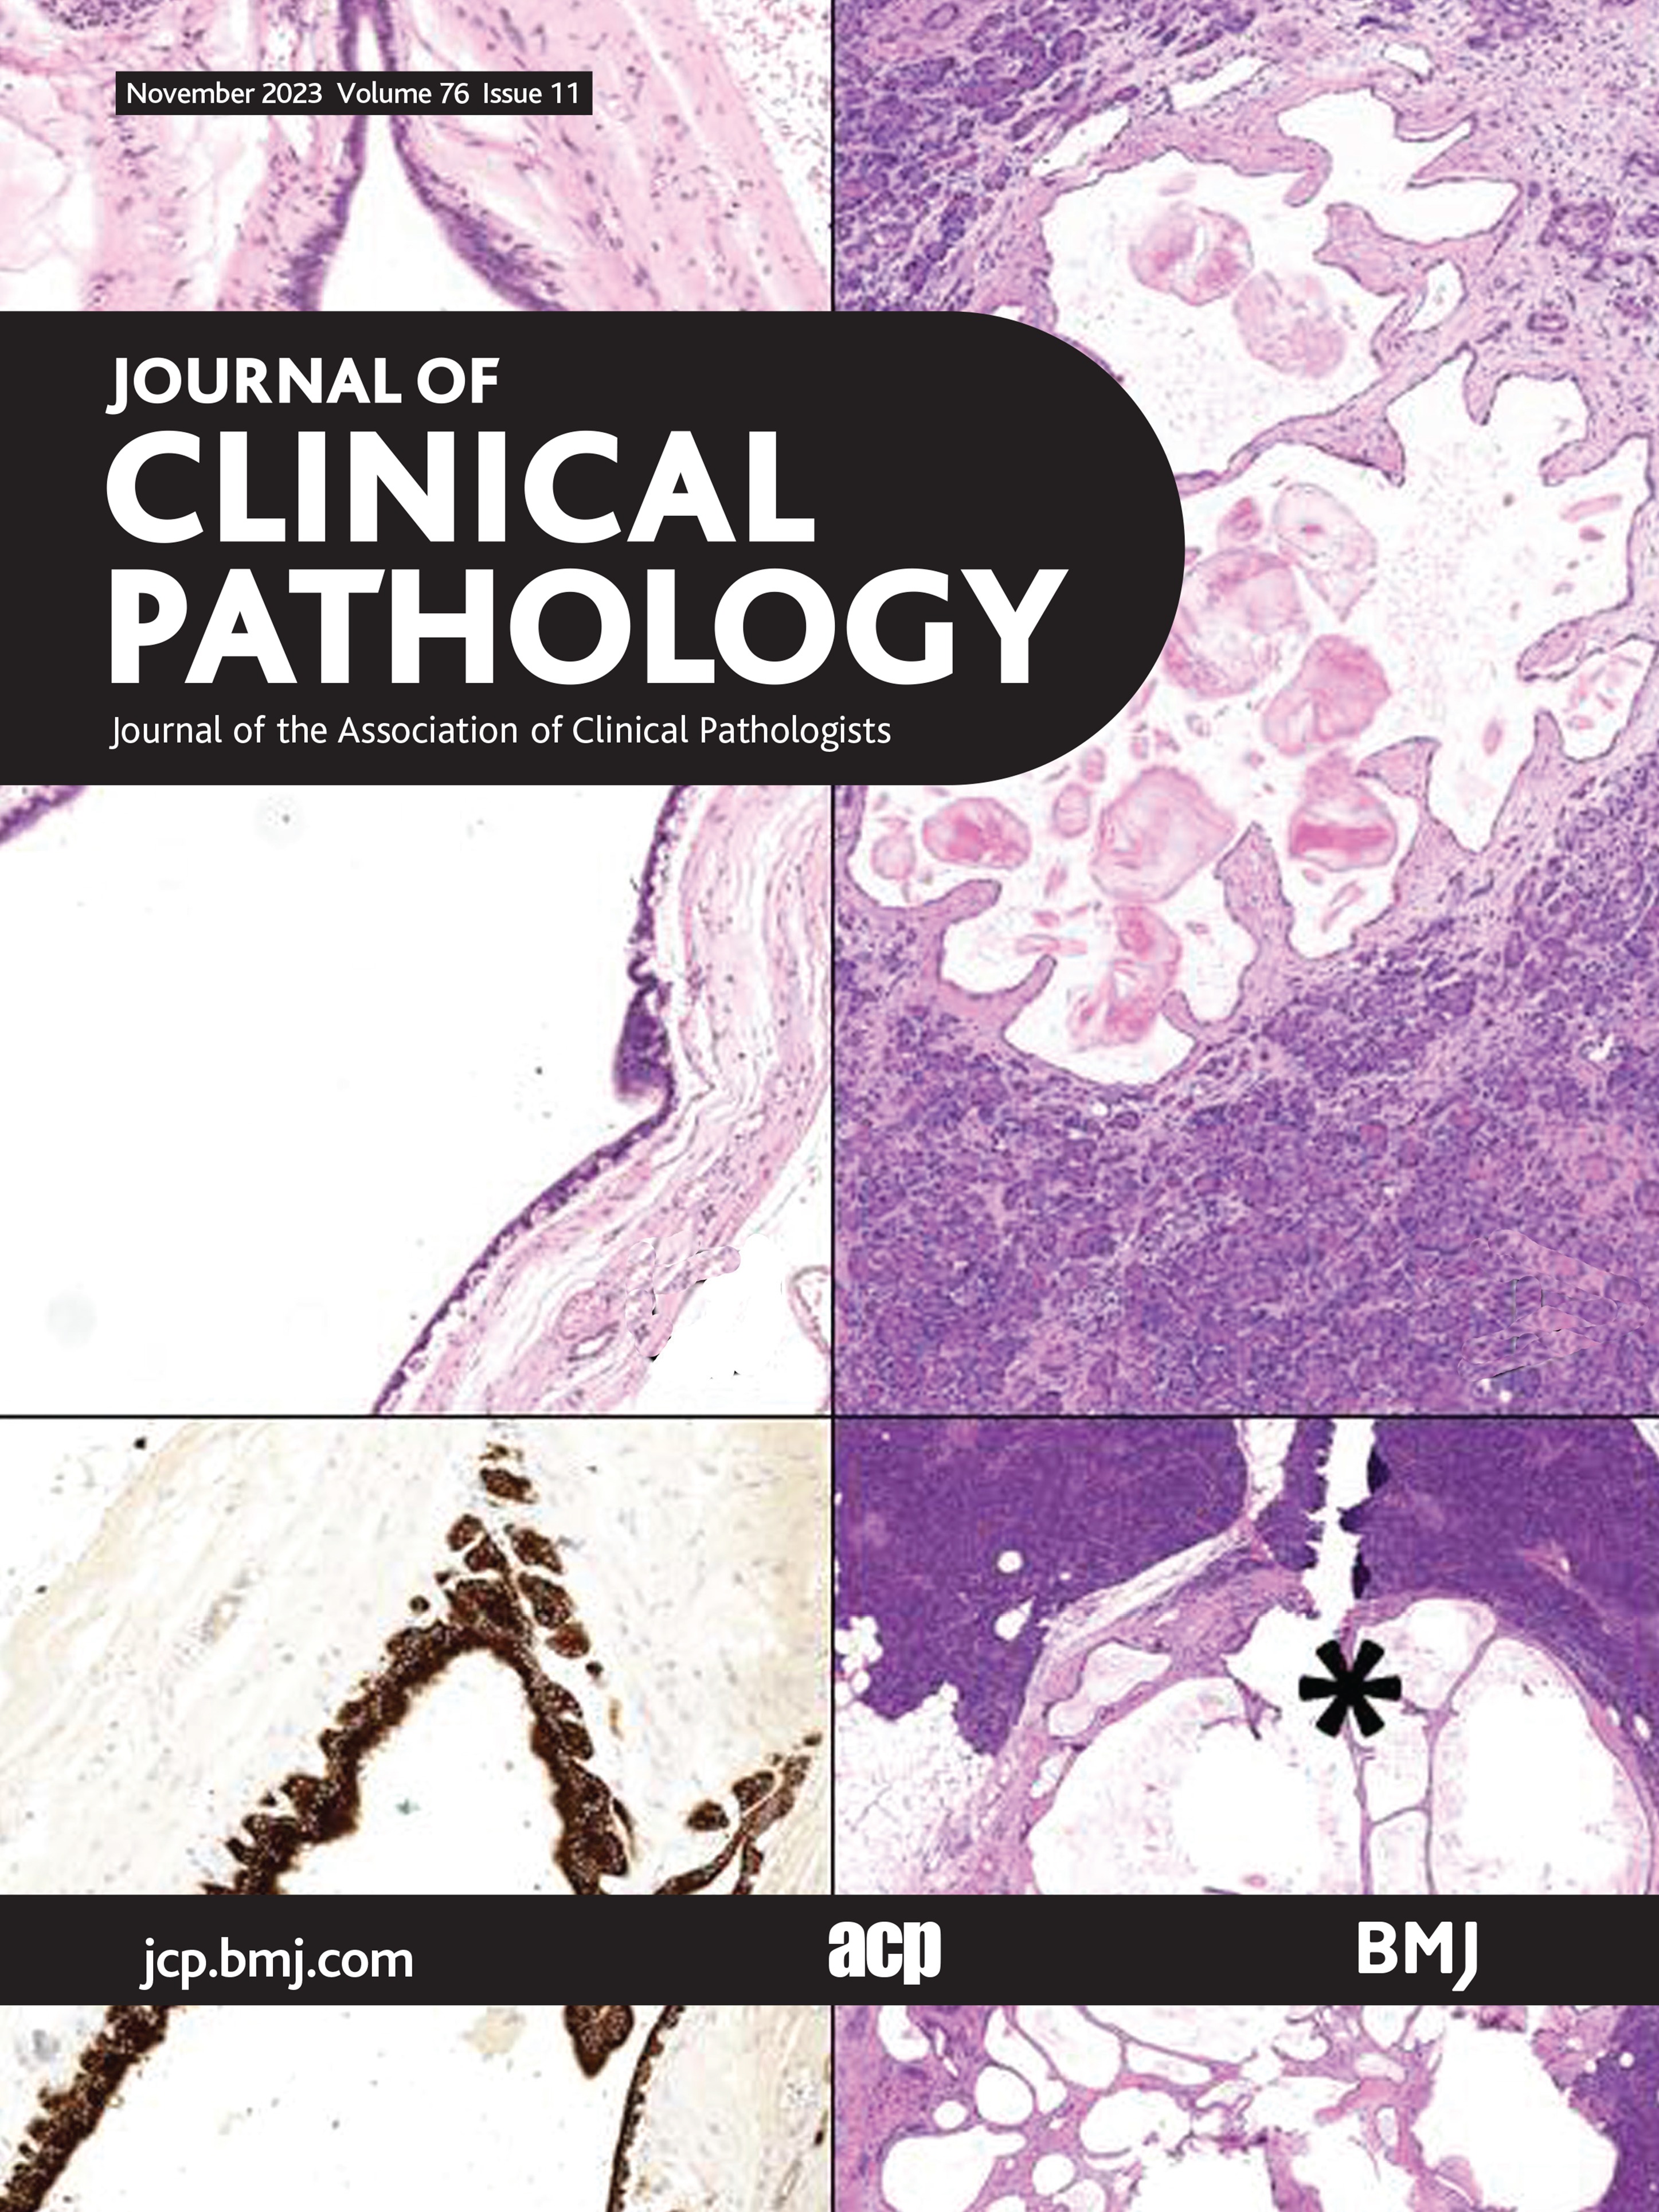 Co-occurring IPMN and pancreatic cancer: the same or different? An overview from histology to molecular pathology